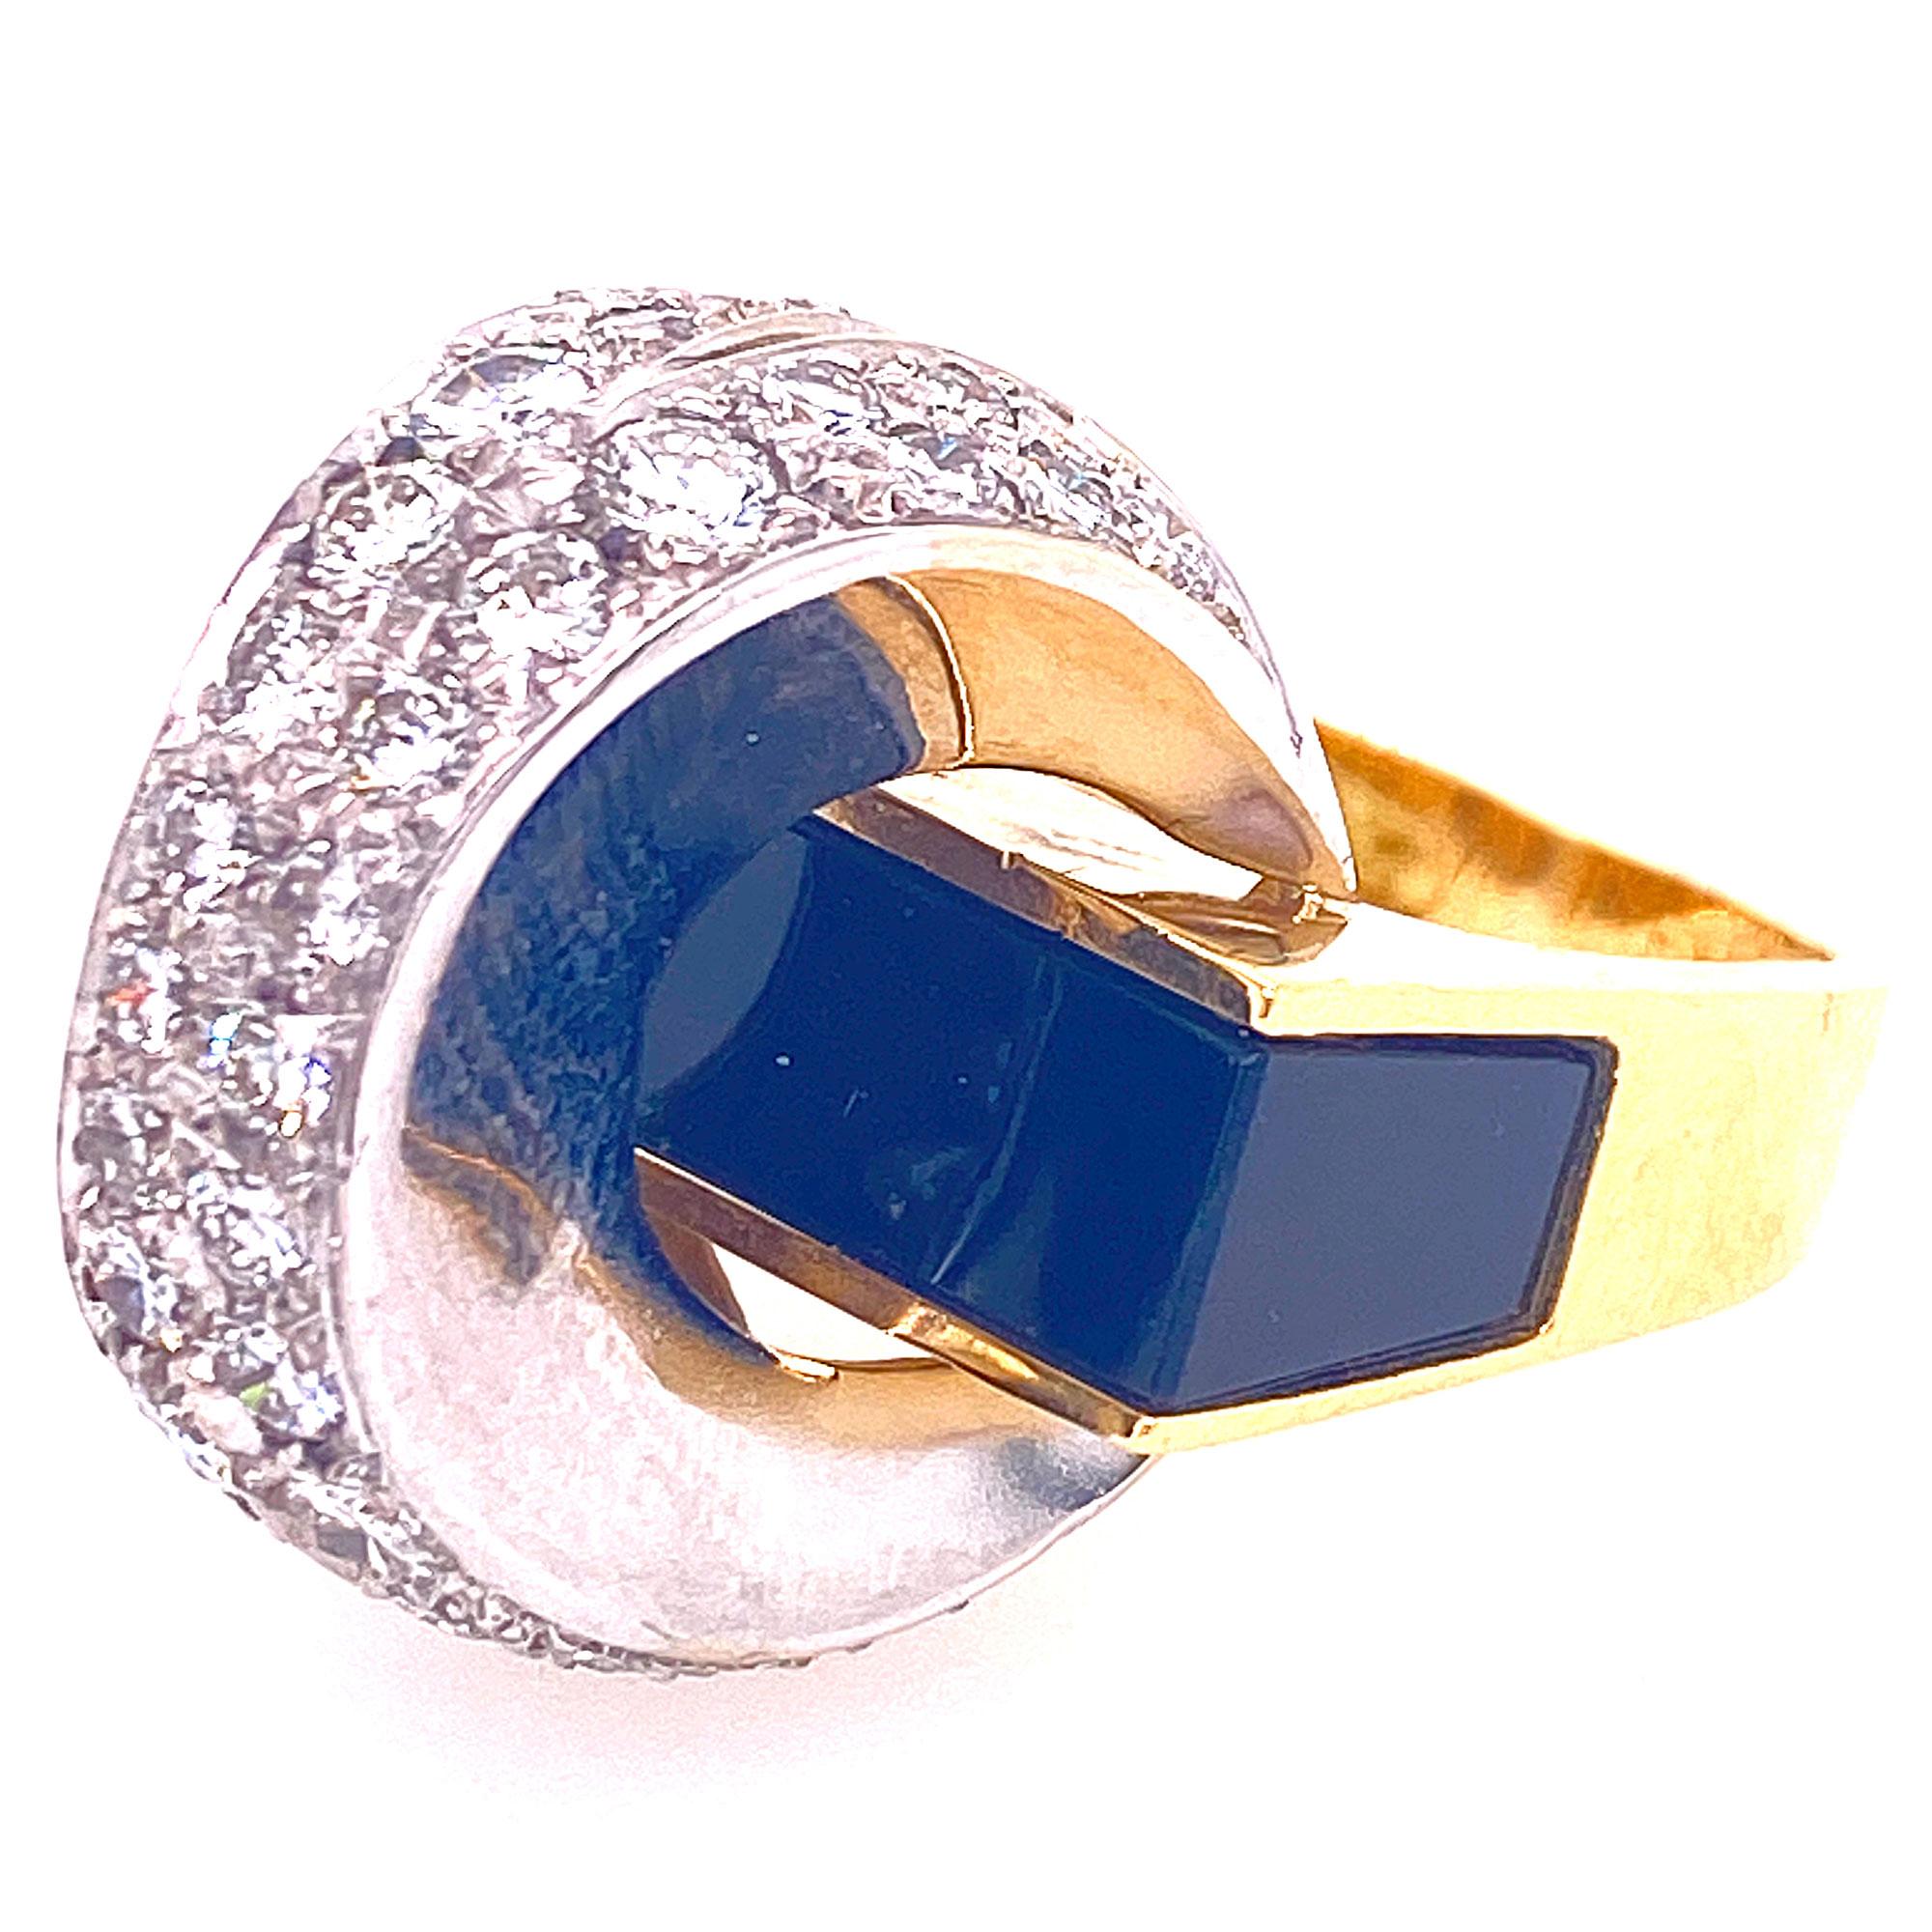 Fabulous contemporary ring featuring white sparkling diamonds and black onyx gemstone. The ring is crafted with 2.00 carats round brilliant cut diamonds set in 14 karat yellow and white gold.  This 1960-1970's ring measures 20mm in height, 20mm in